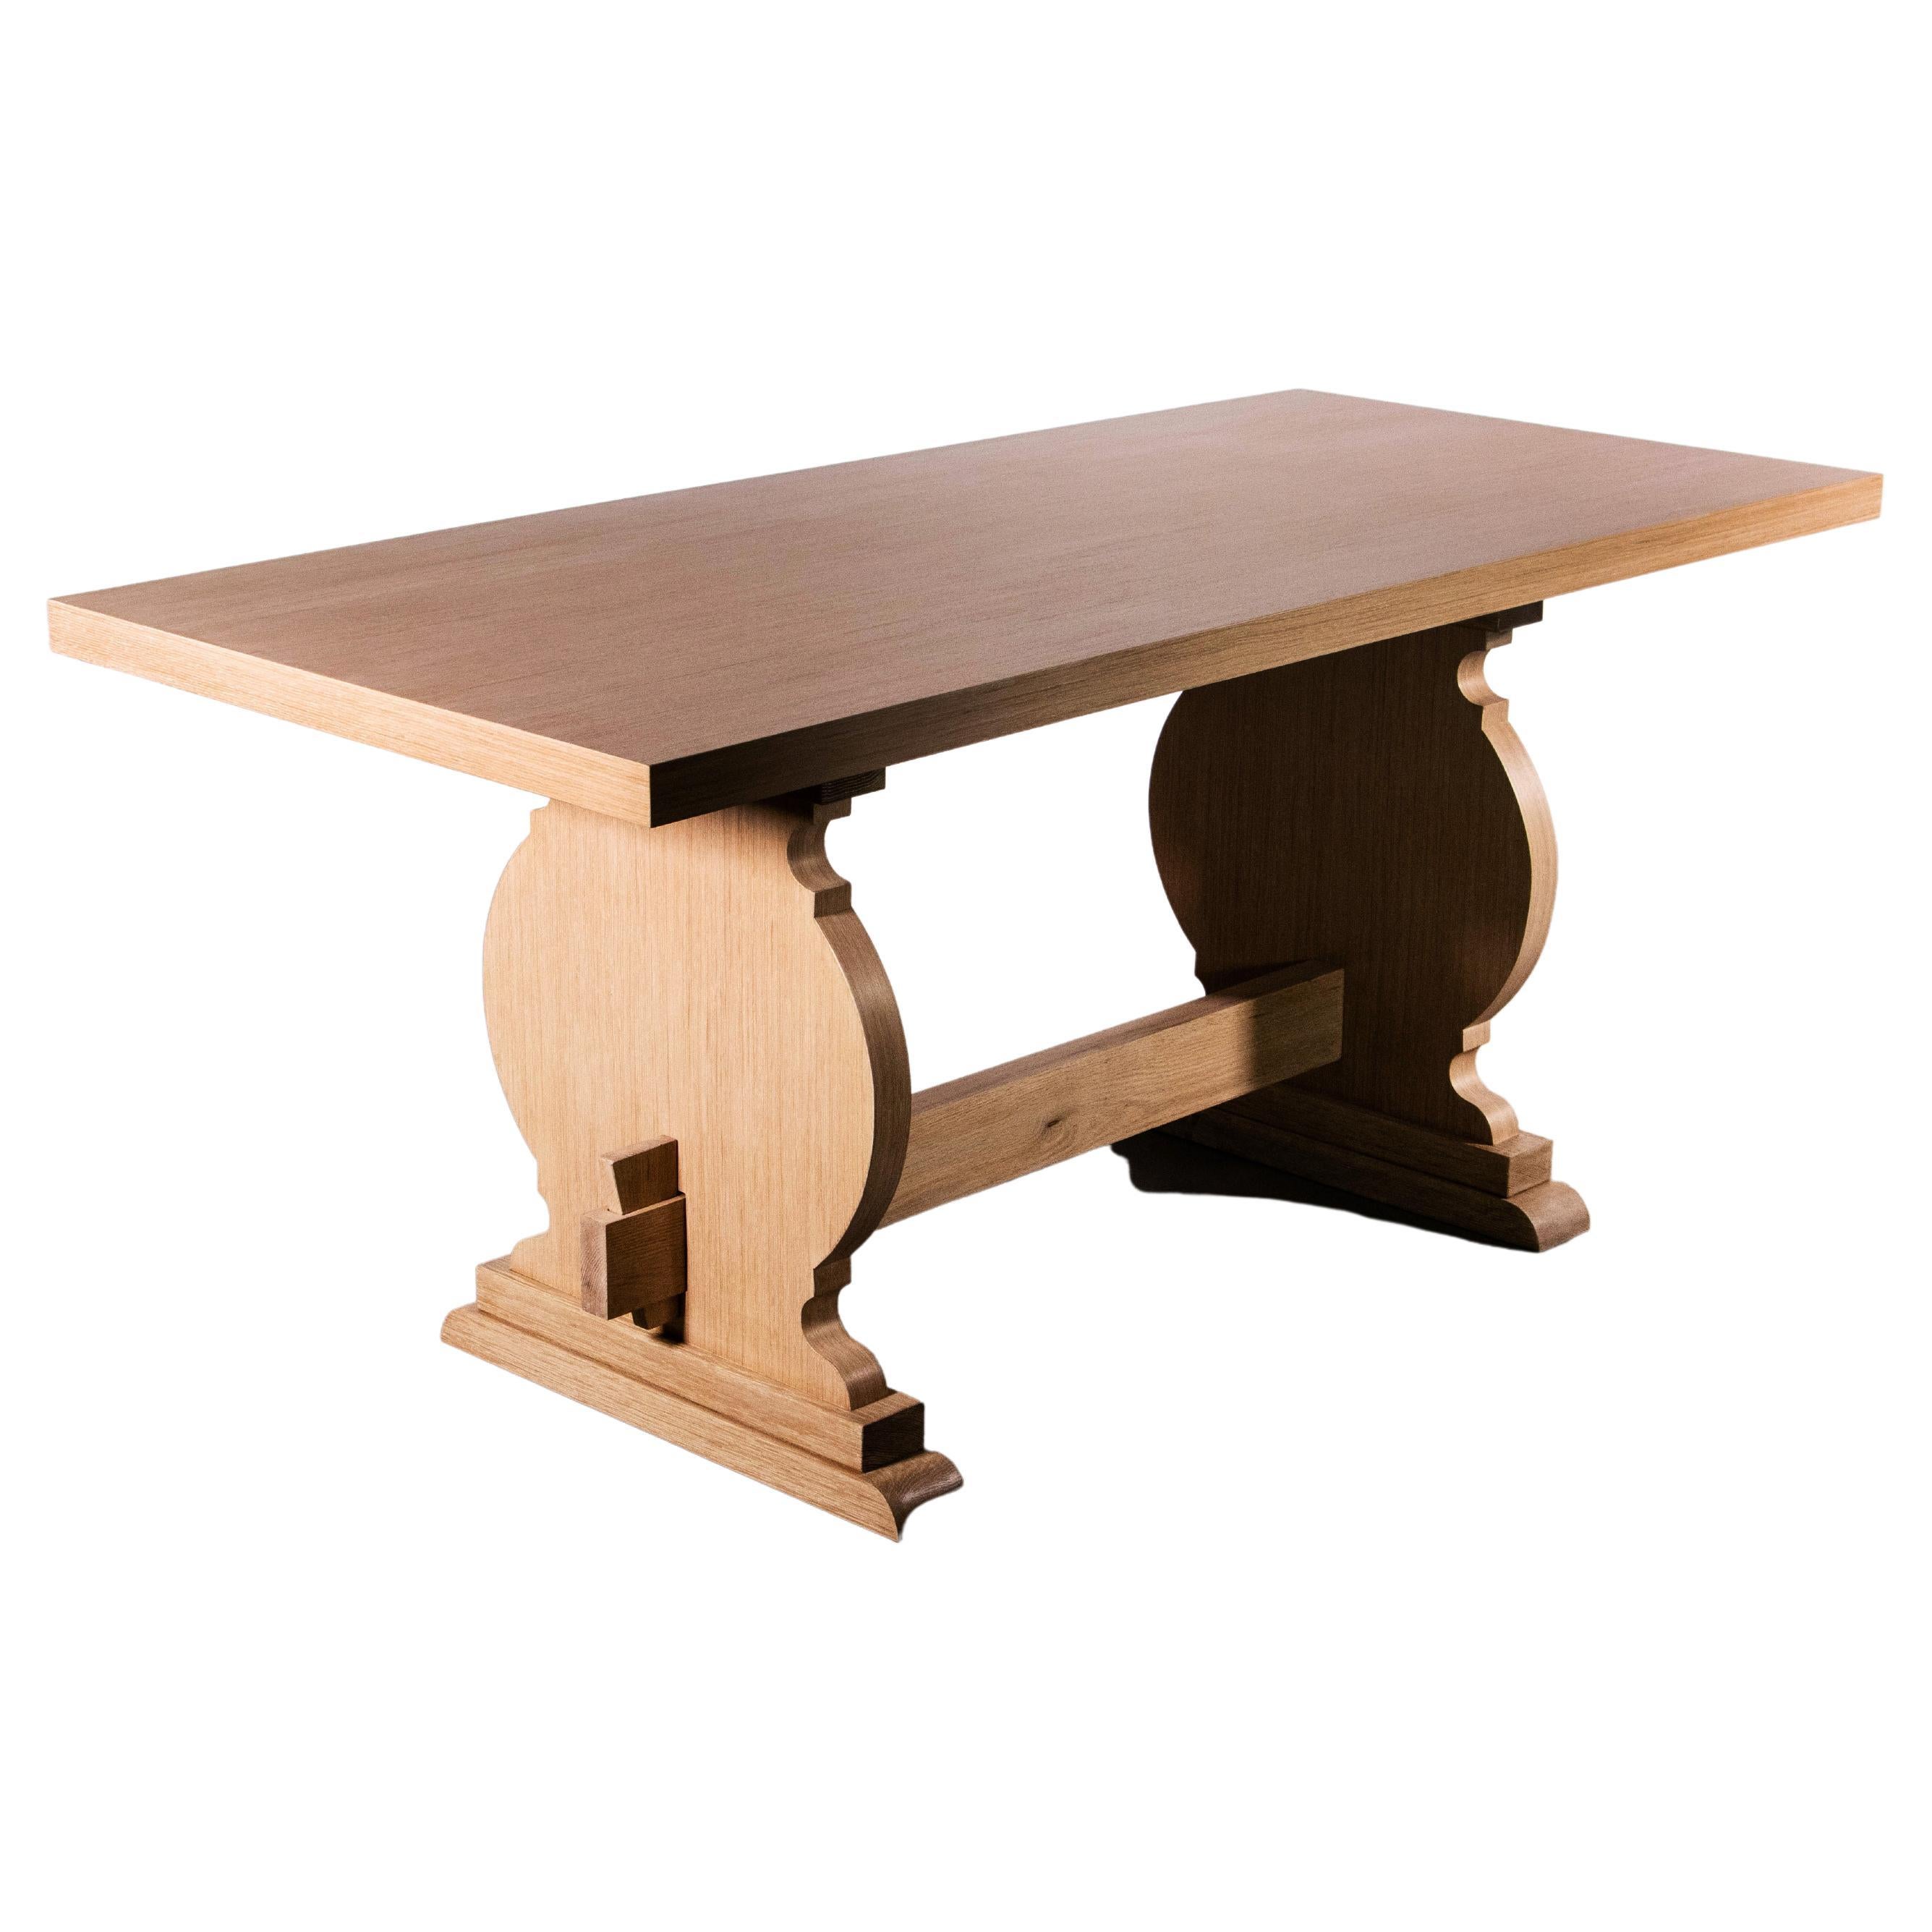 The Manolo table is a modern take on a Basque-inspired trestle base. Shown here in Cerused Oak but available in any wood or finish and in custom sizes. The twin pedestals may be arranged at different points to accommodate your seating configuration.